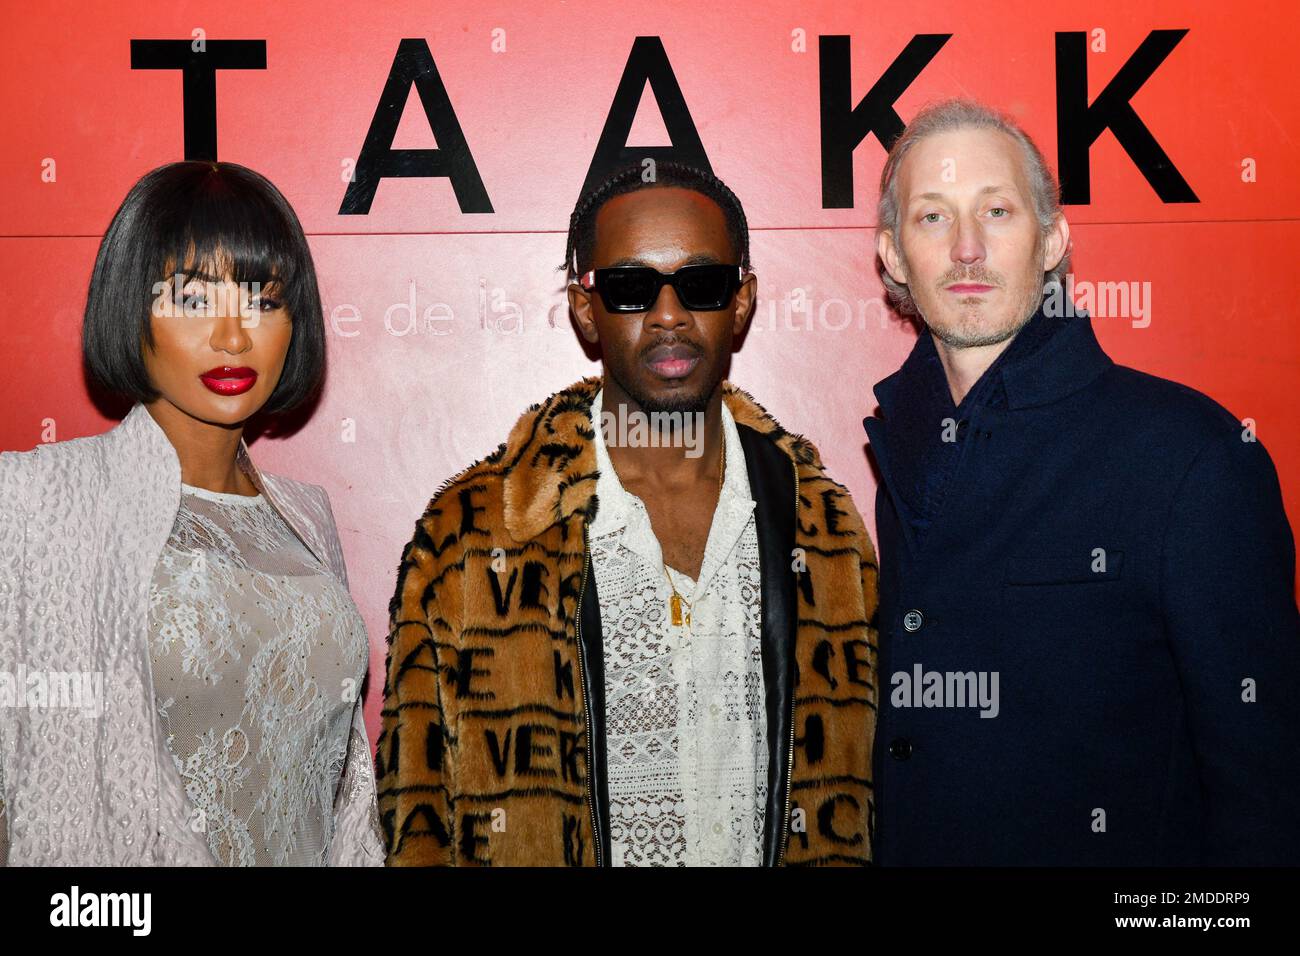 Miss Cote d'Ivoire 2005 and ex-wife of Ivorian international soccer player Zokora Didier Maestro, Brian Amont and Bruno Guery (Luc from Emily in Paris, Netflix series) (L-R) attend the TAAKK Paris Fashion Week - Menswear Fall-Winter 2023 show as part of Paris Fashion Week on January 22, 2023 in Paris, France. Photo by Jana Call me J/ABACAPRESS.COM Stock Photo